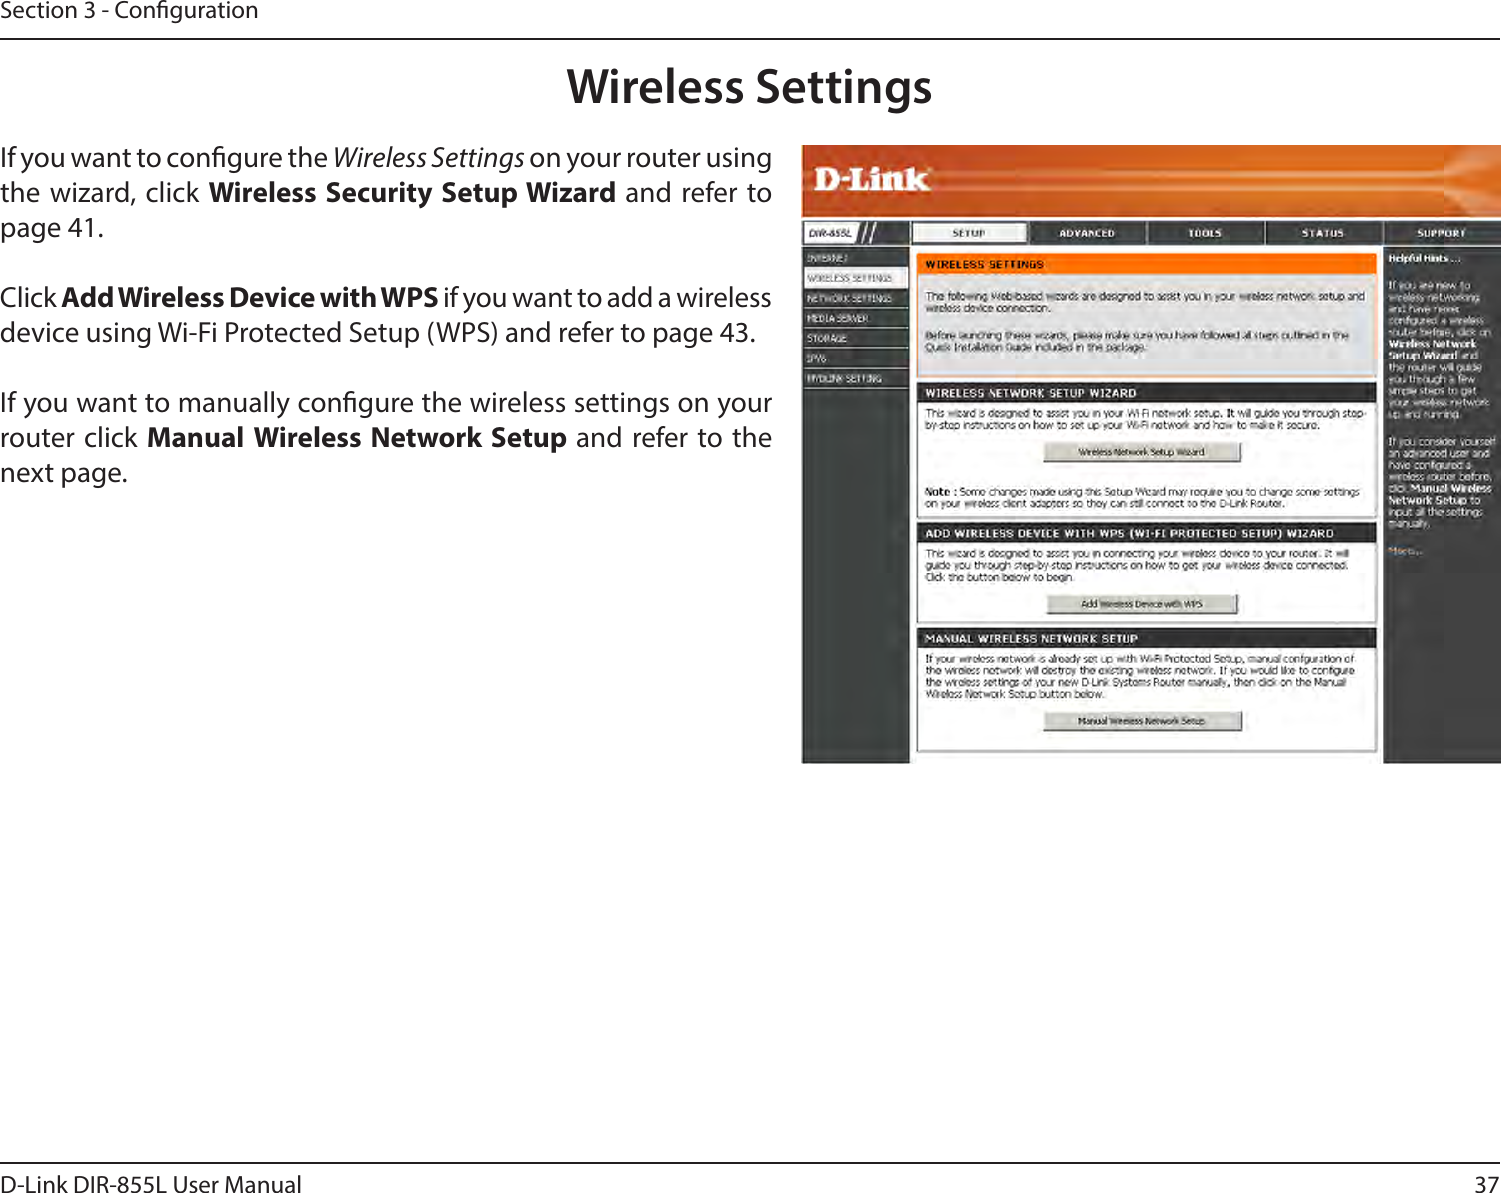 37D-Link DIR-855L User ManualSection 3 - CongurationWireless SettingsIf you want to congure the Wireless Settings on your router using the wizard, click WirelessSecuritySetupWizardand refer to page 41.Click Add Wireless Device with WPS if you want to add a wireless device using Wi-Fi Protected Setup (WPS) and refer to page 43.If you want to manually congure the wireless settings on your router click Manual Wireless Network Setup and refer to the next page.